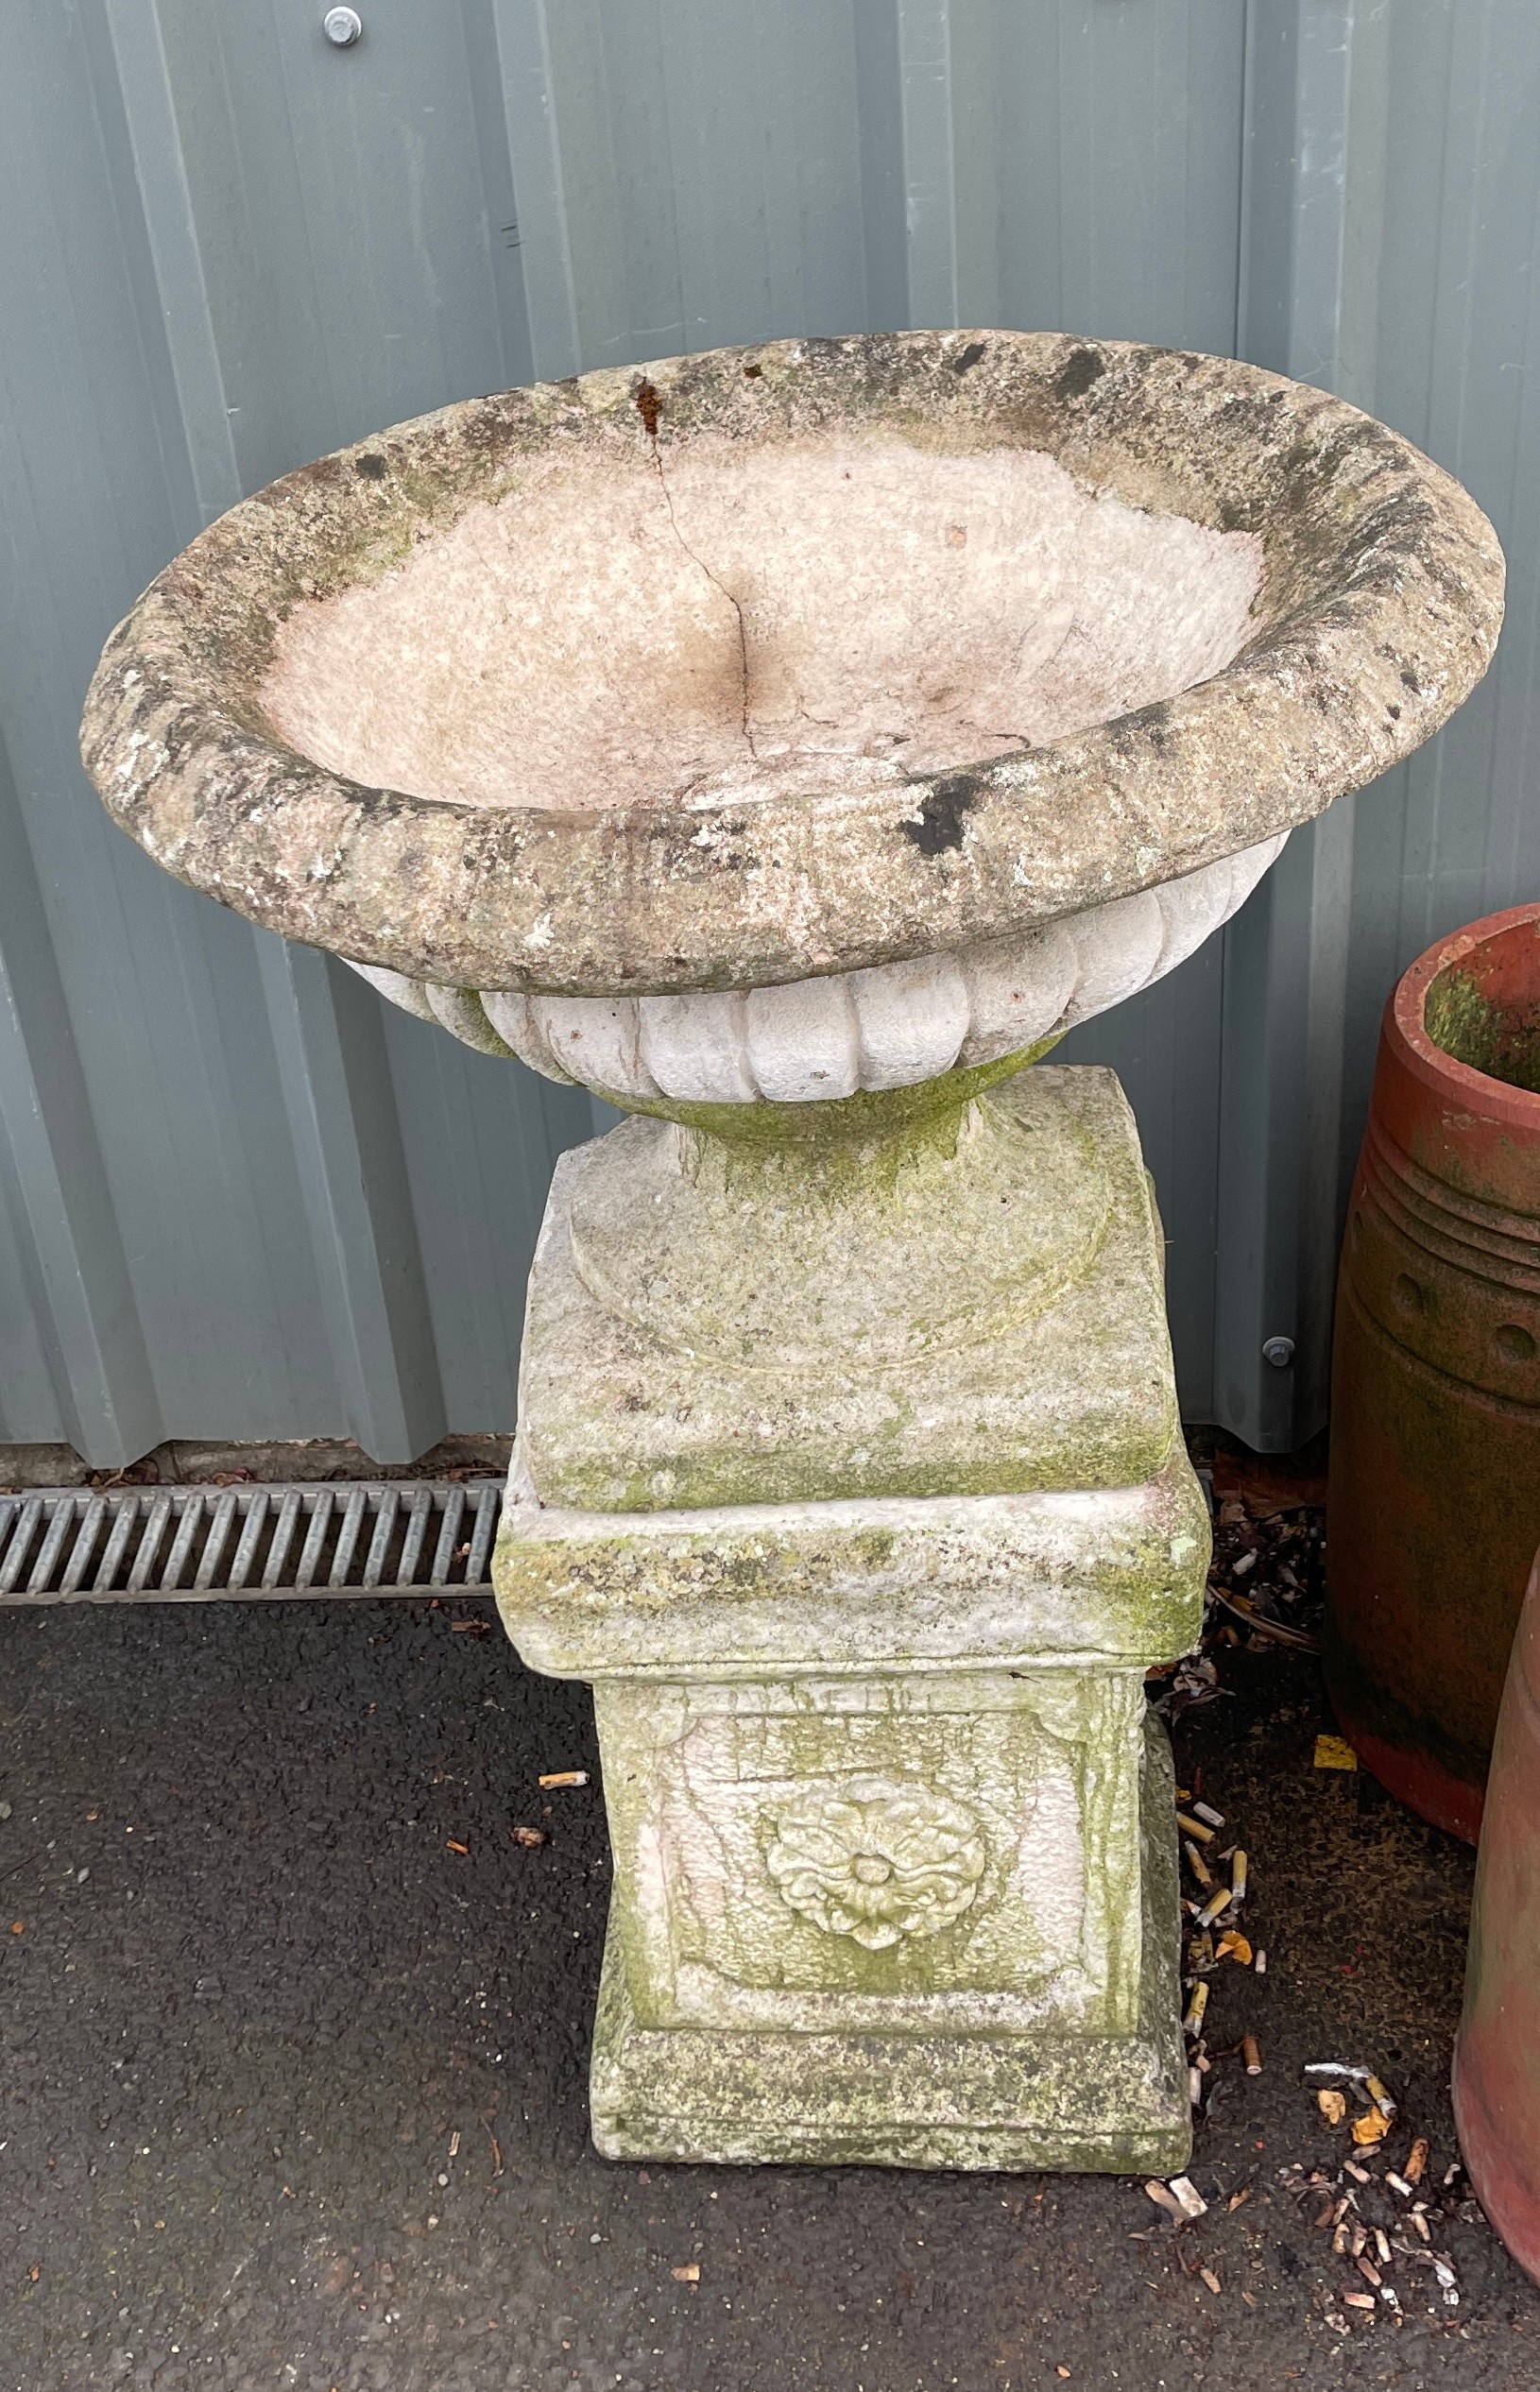 3 Piece stone planter, approximate height 35 inches